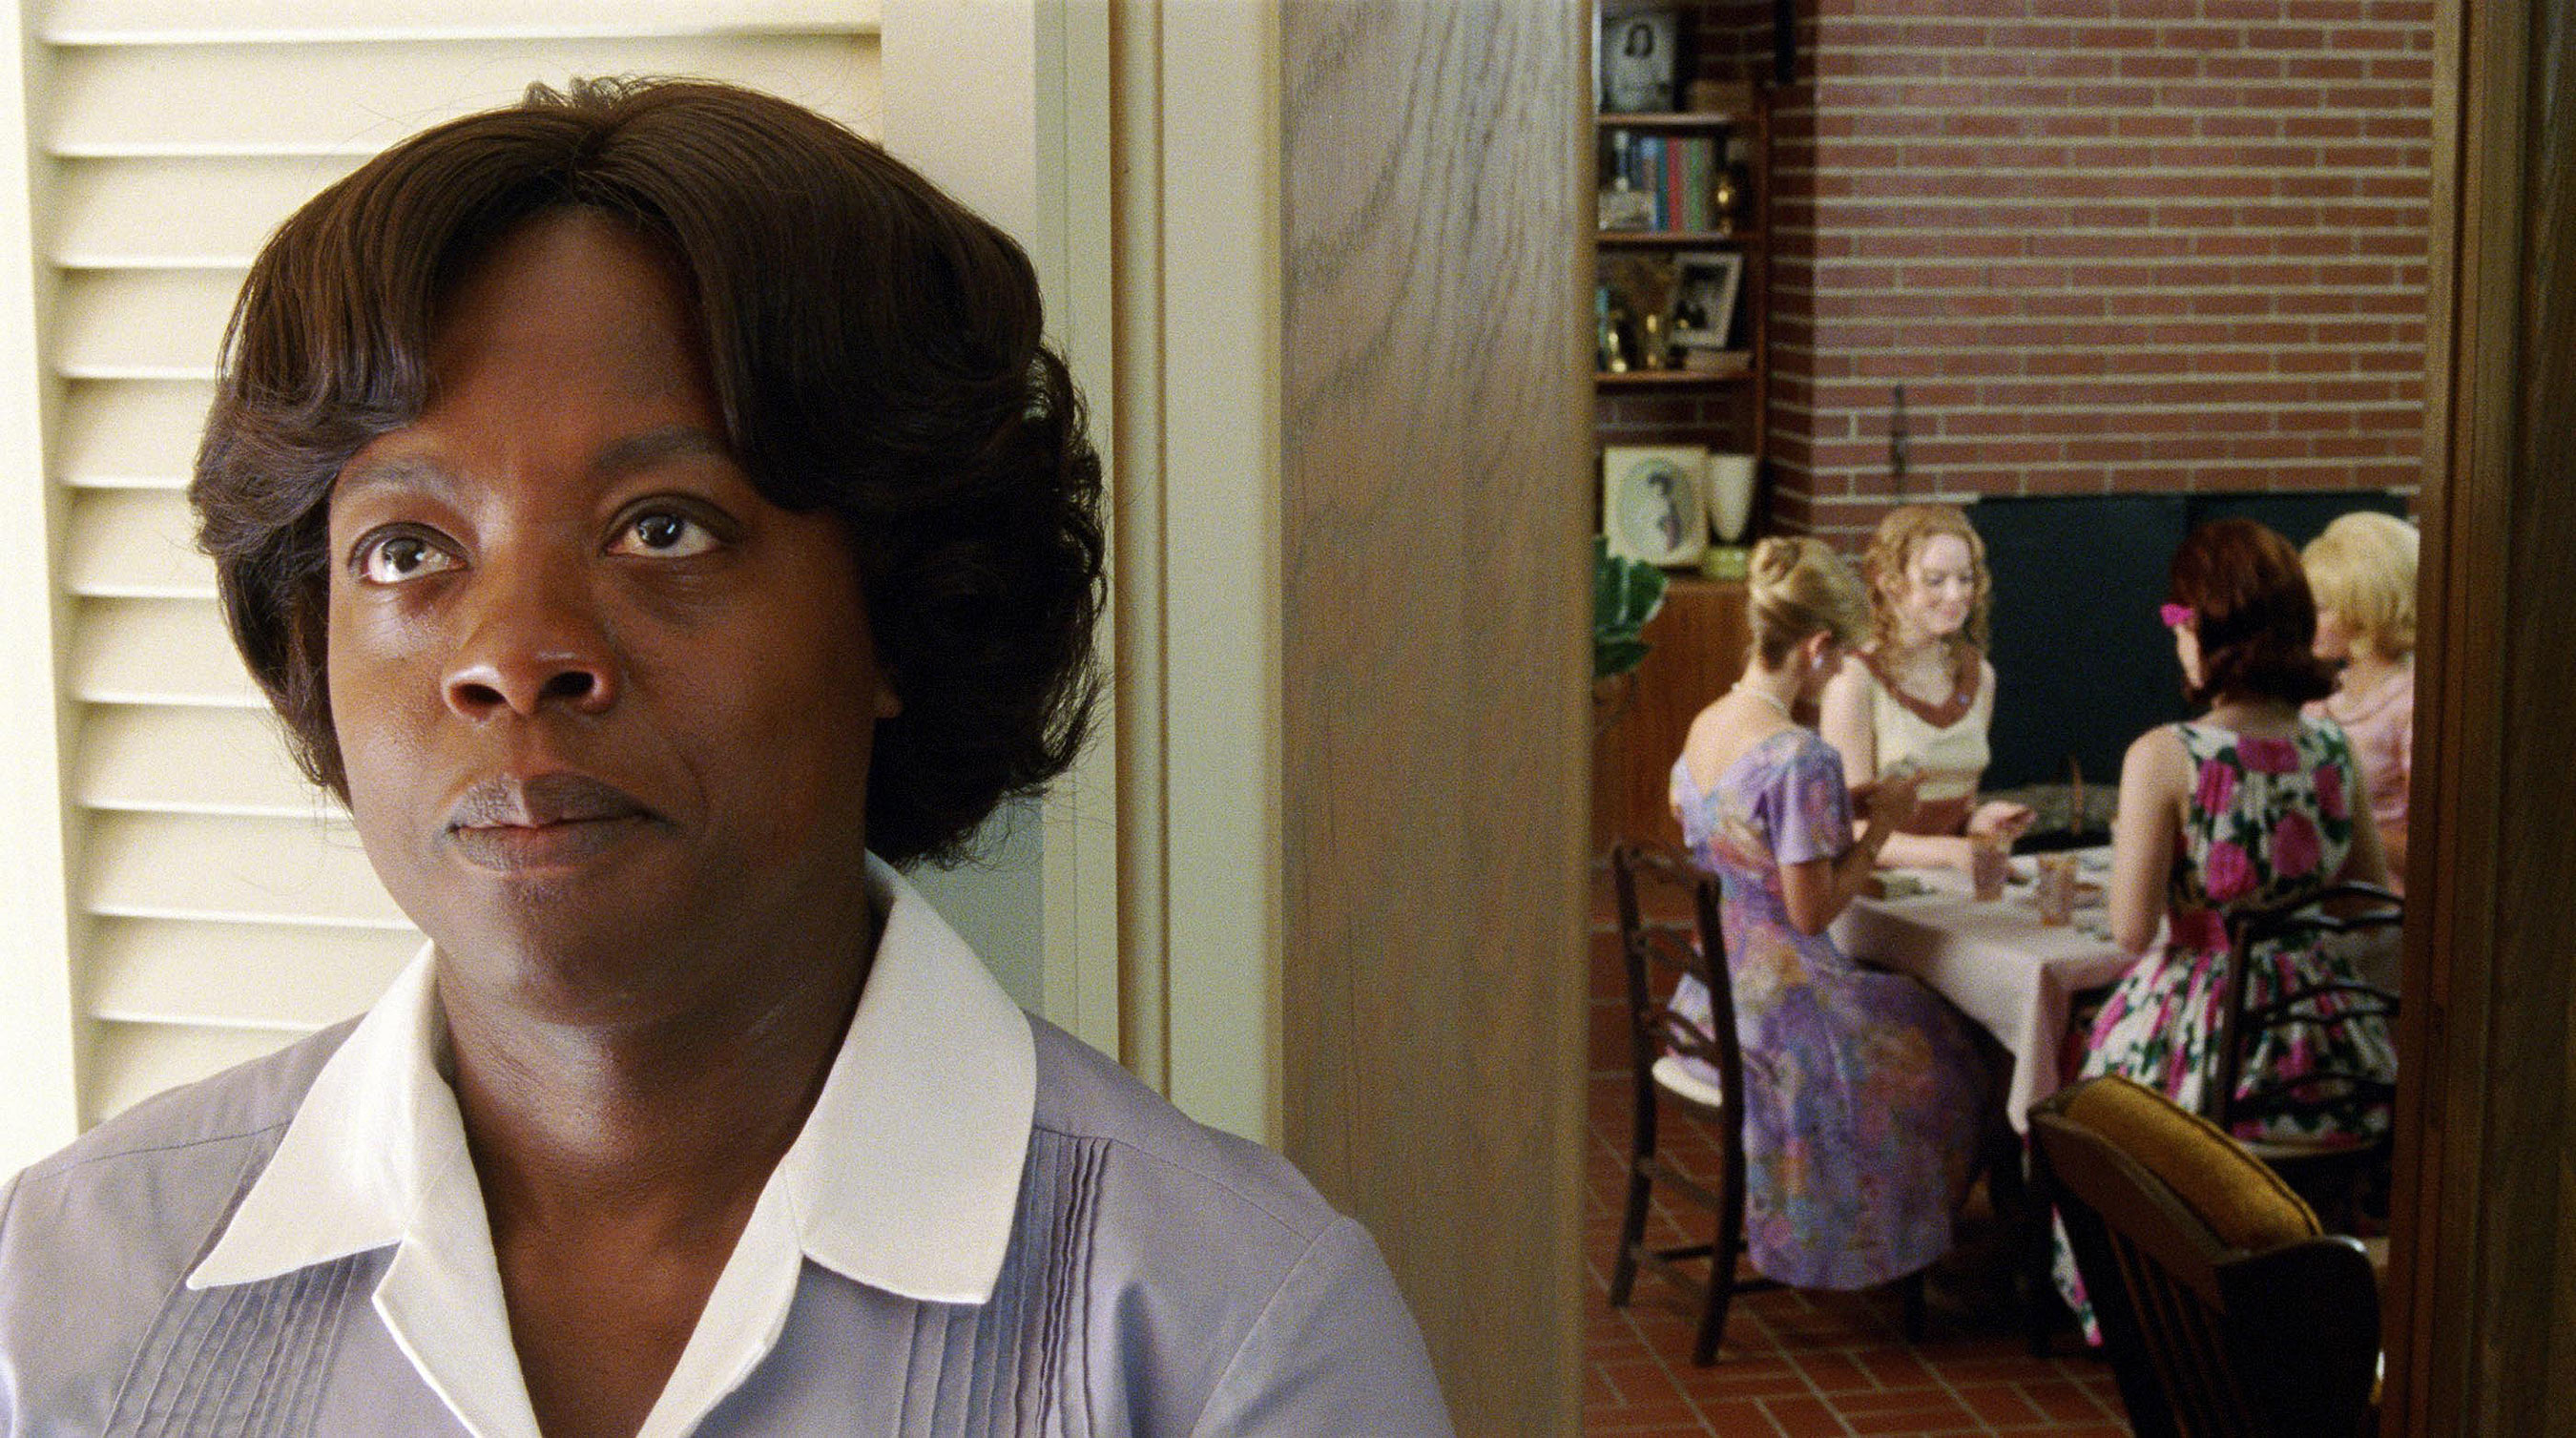 Photo by Dreamworks Pictures/Kobal/REX/Shutterstock (5884951j)
Viola Davis
The Help - 2011
Director: Tate Taylor
Dreamworks Pictures